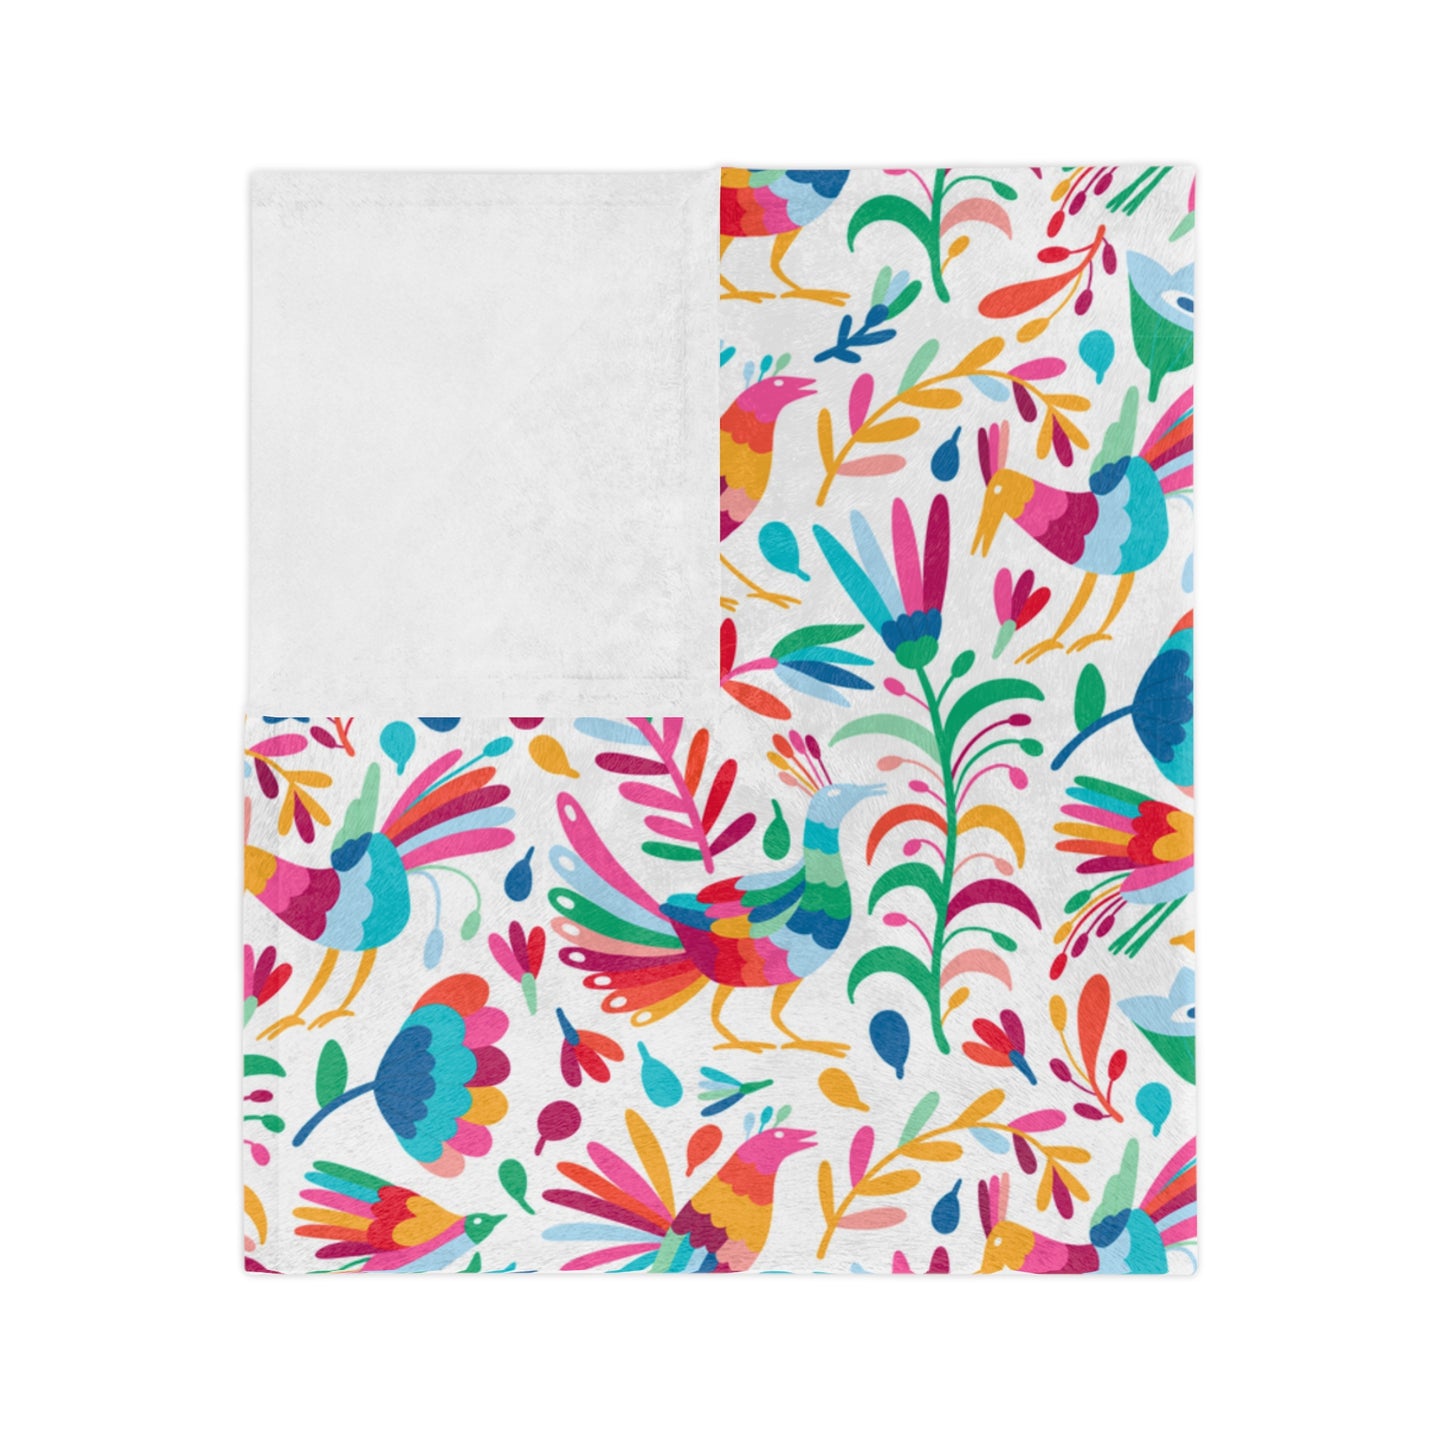 Otomi art Velveteen Blanket for Mexican home decor. Colorful Mexican folk art for Mexican family. Cobija mexicana.